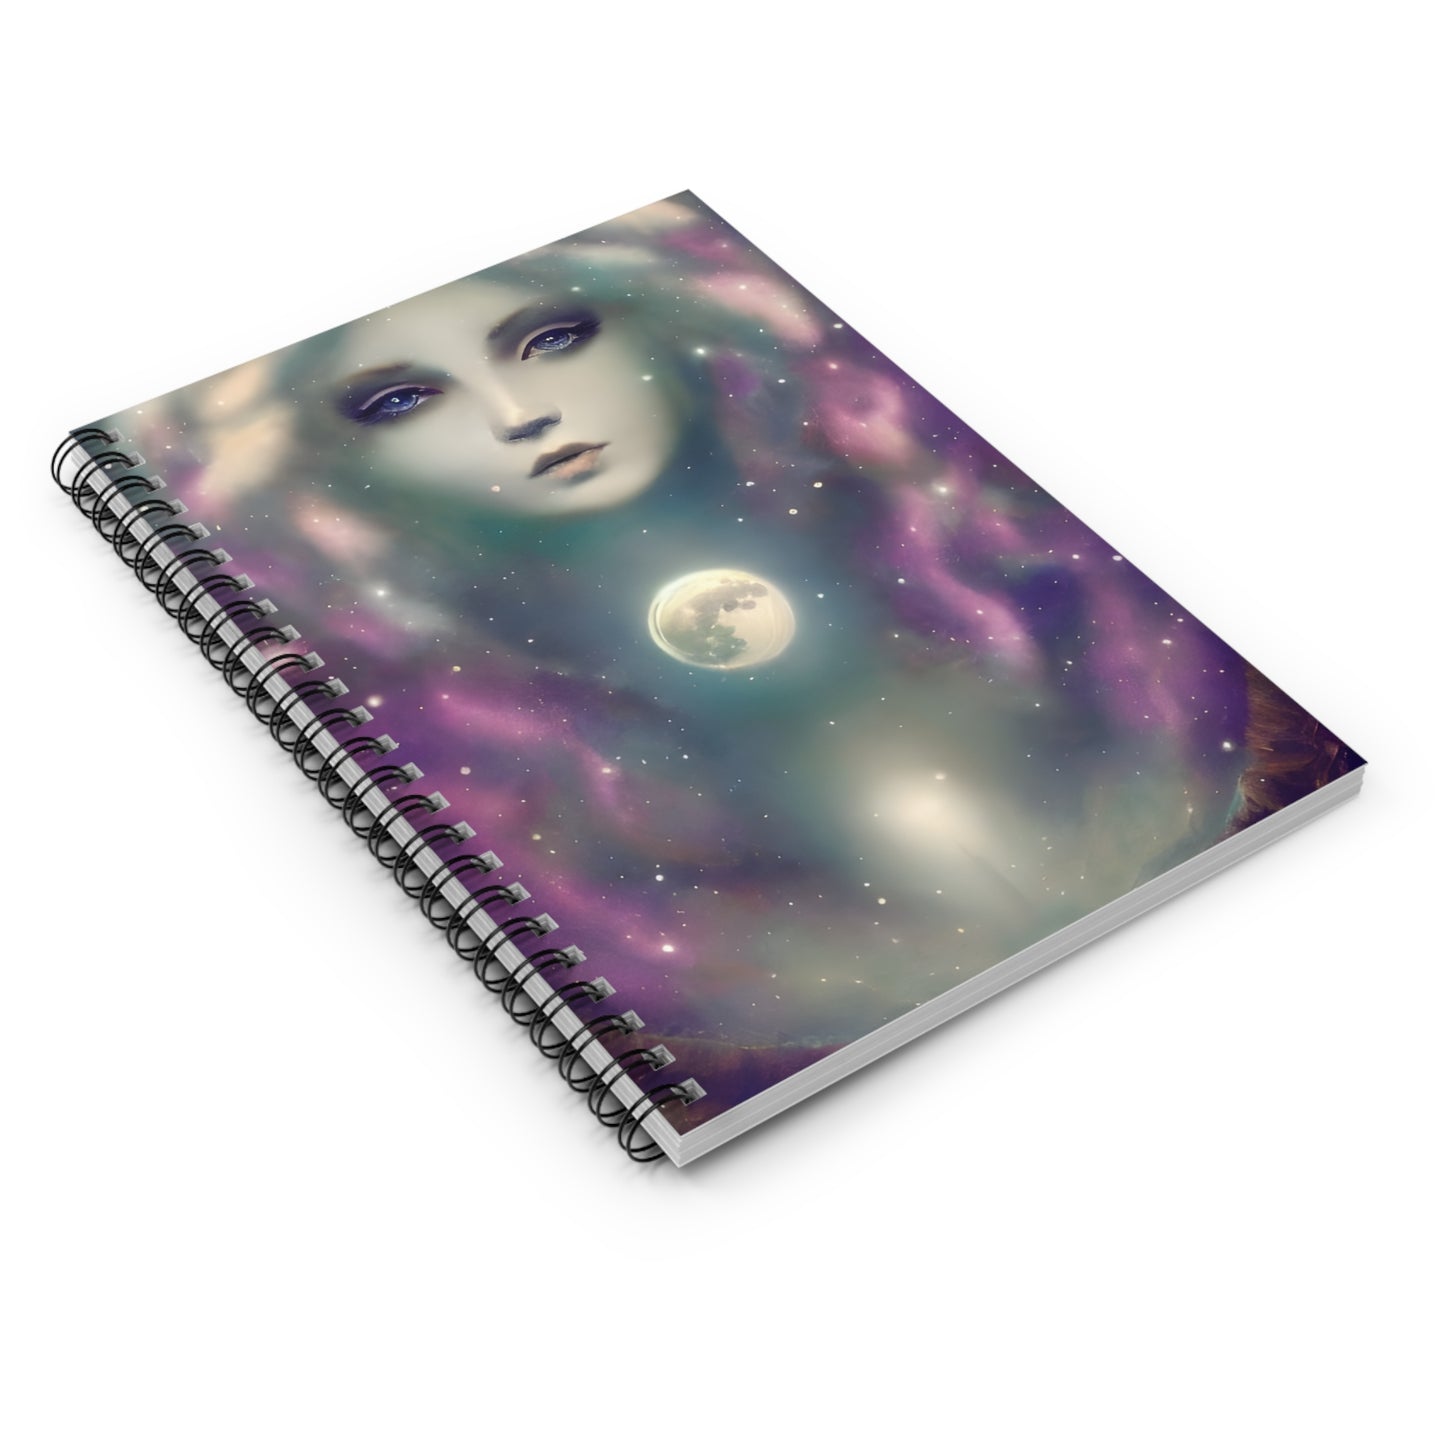 Majestic Moon Goddess Spiral Notebook - Ruled Line, 118 Ruled Line Pages